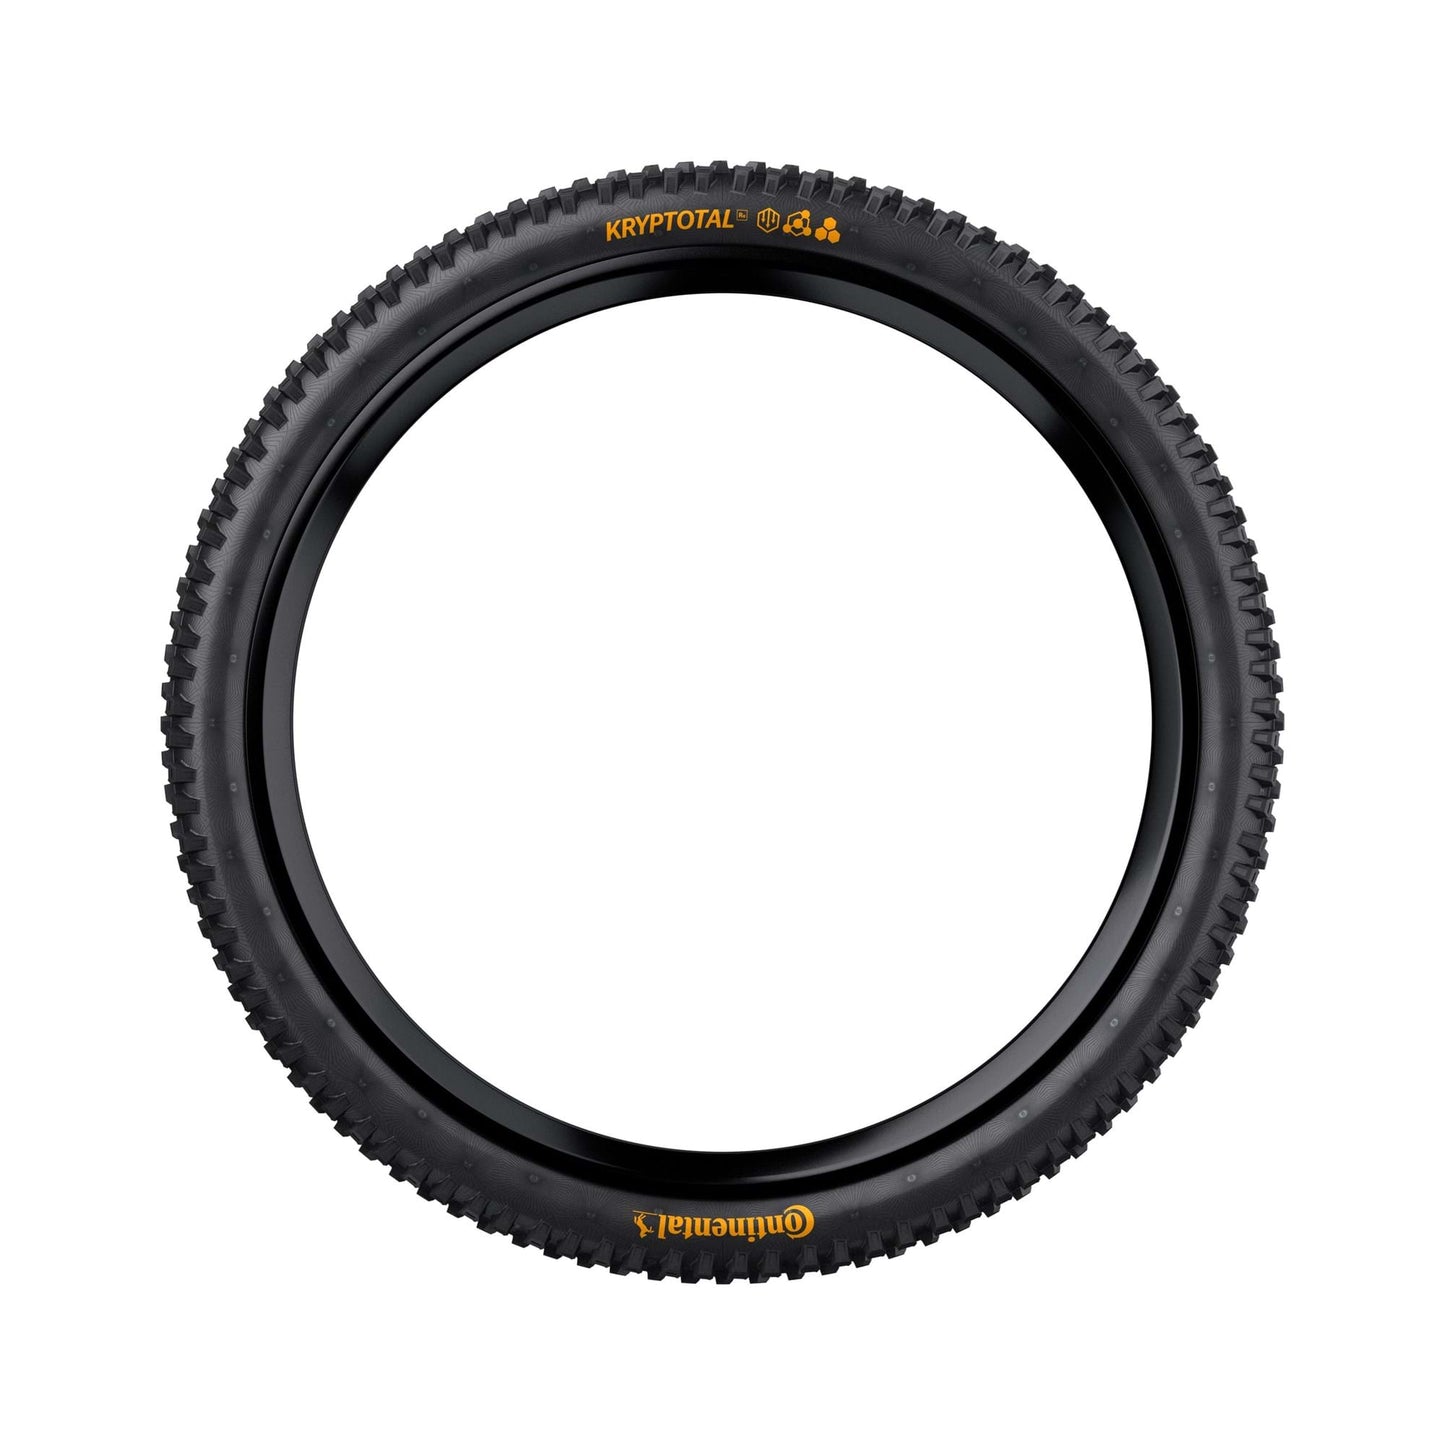 CONTINENTAL KRYPTOTAL-RE DOWNHILL 27.5X2.40" SOFT FOLDING TYRE